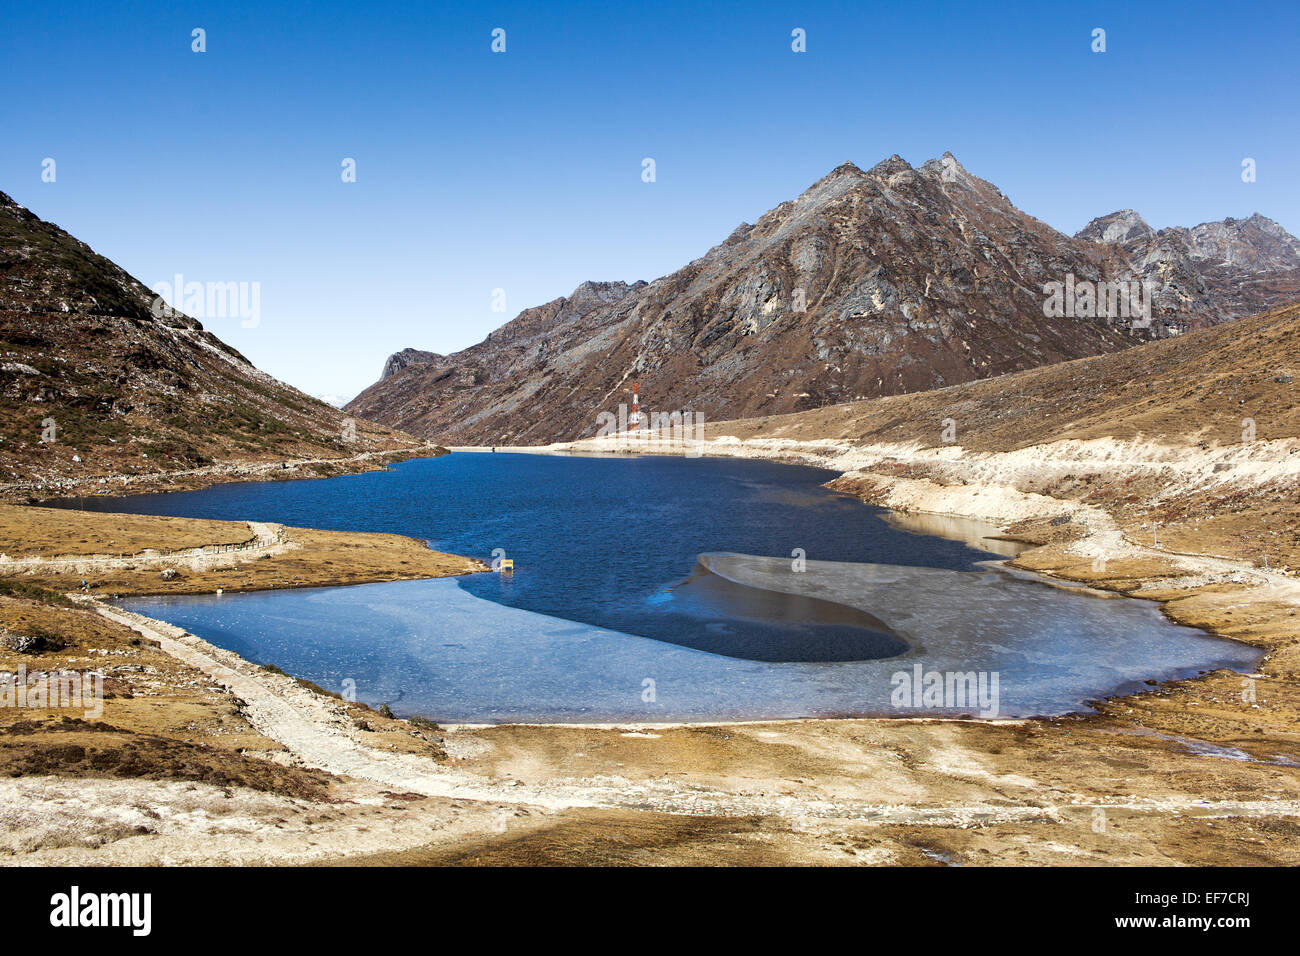 Sela Lake - also called Paradise lake - situated on top of Sela ...